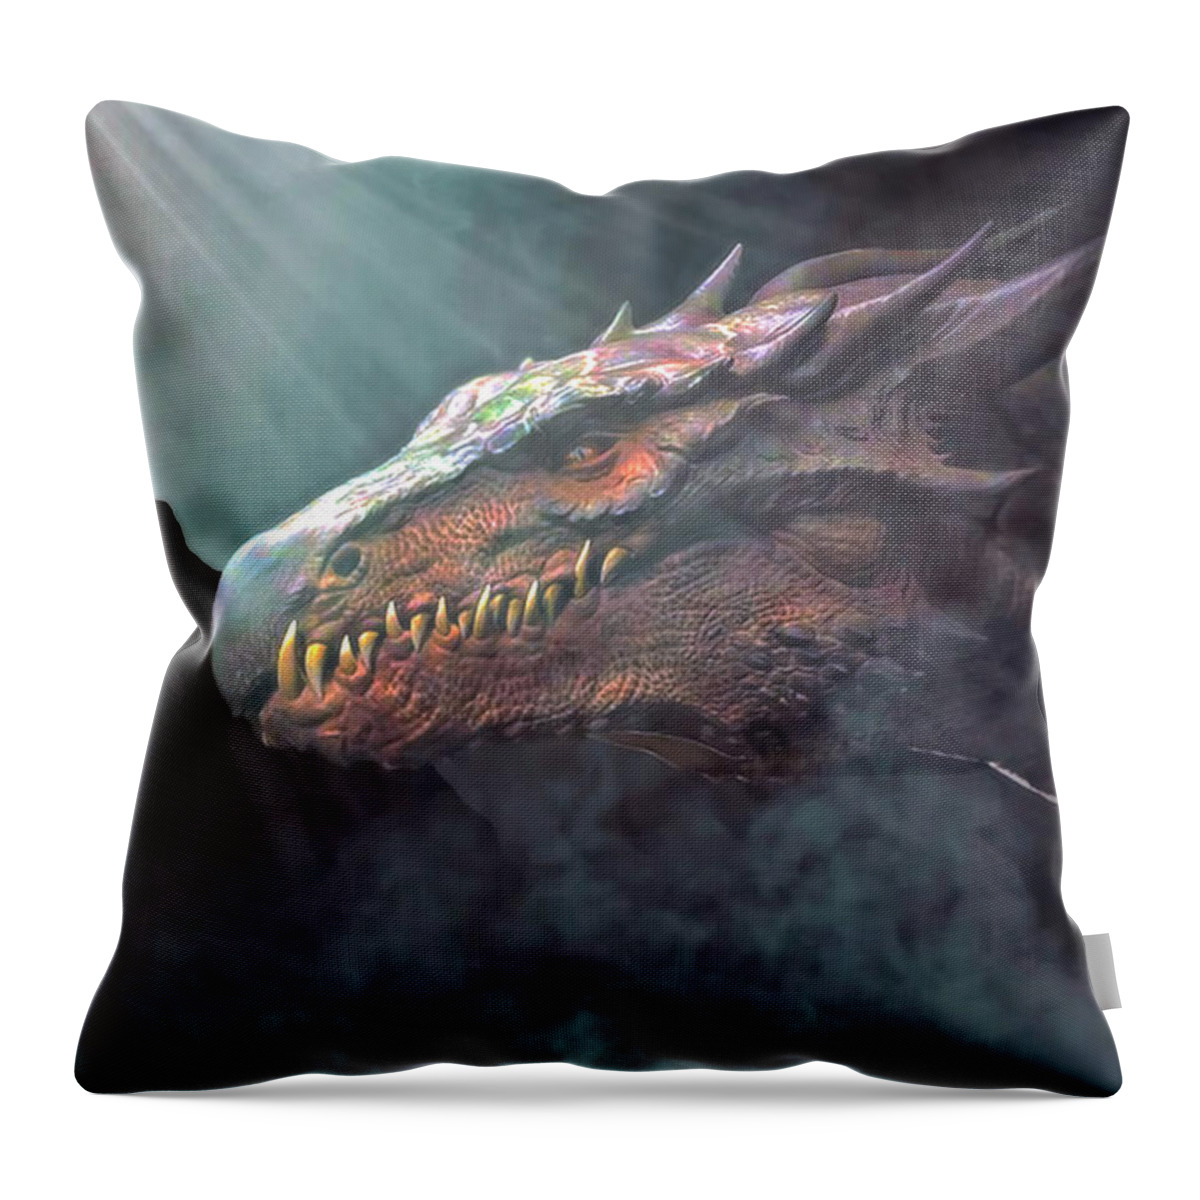 2d Throw Pillow featuring the digital art Dragon's Lair by Brian Wallace